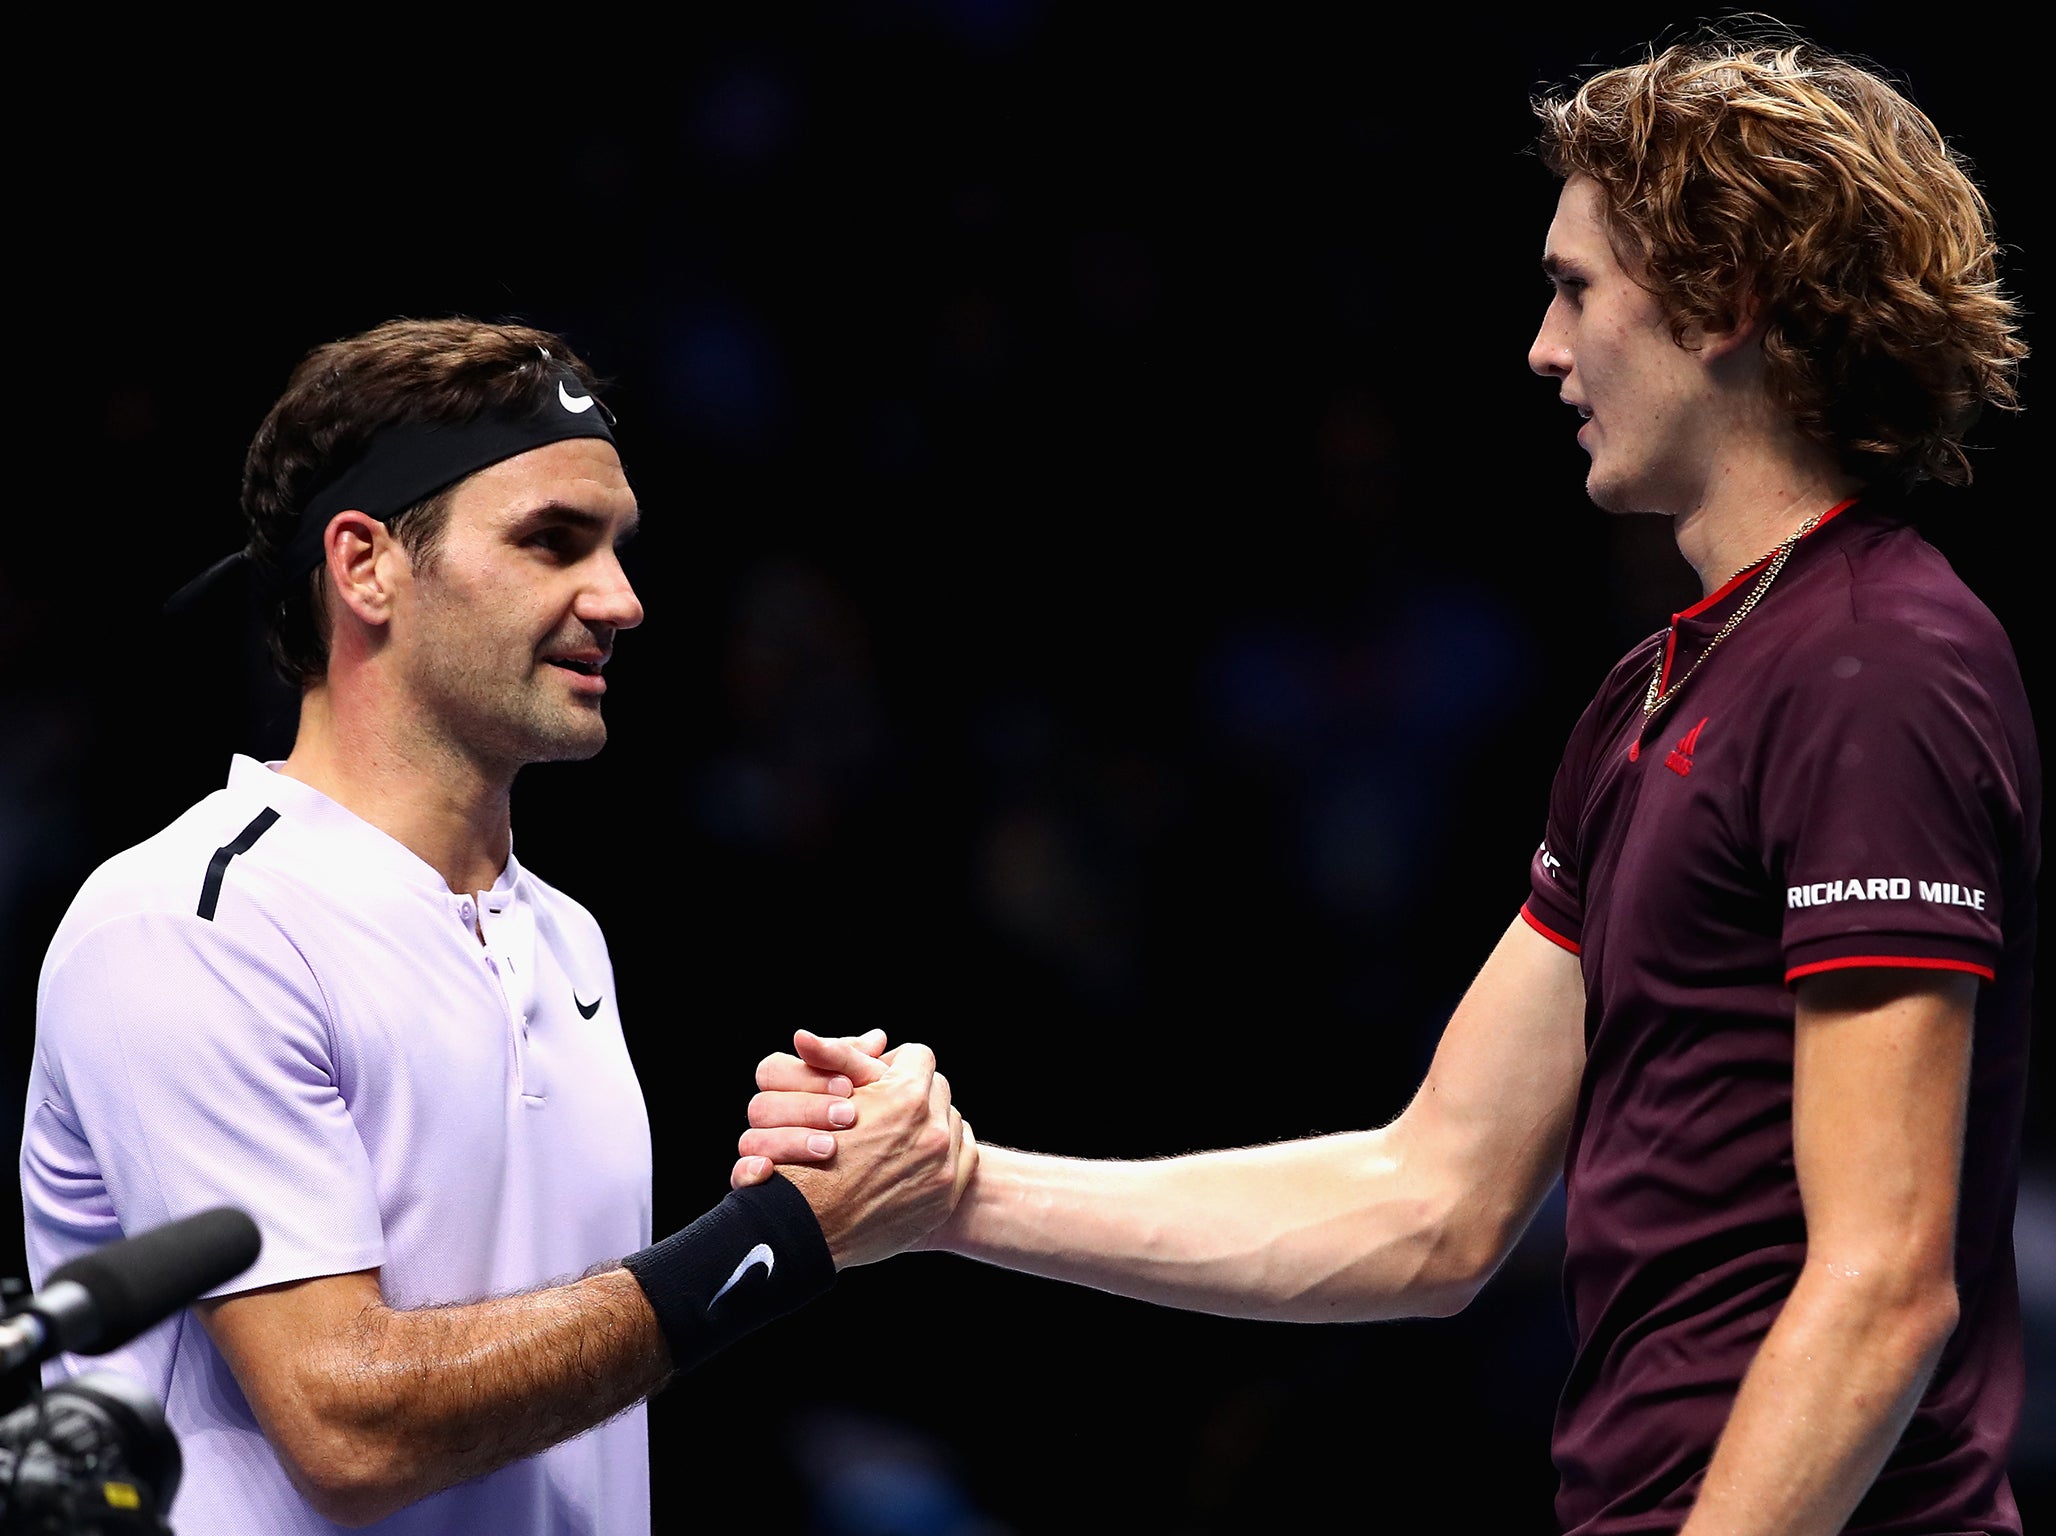 Federer had enough in the tank to beat Zverev in three on Tuesday night